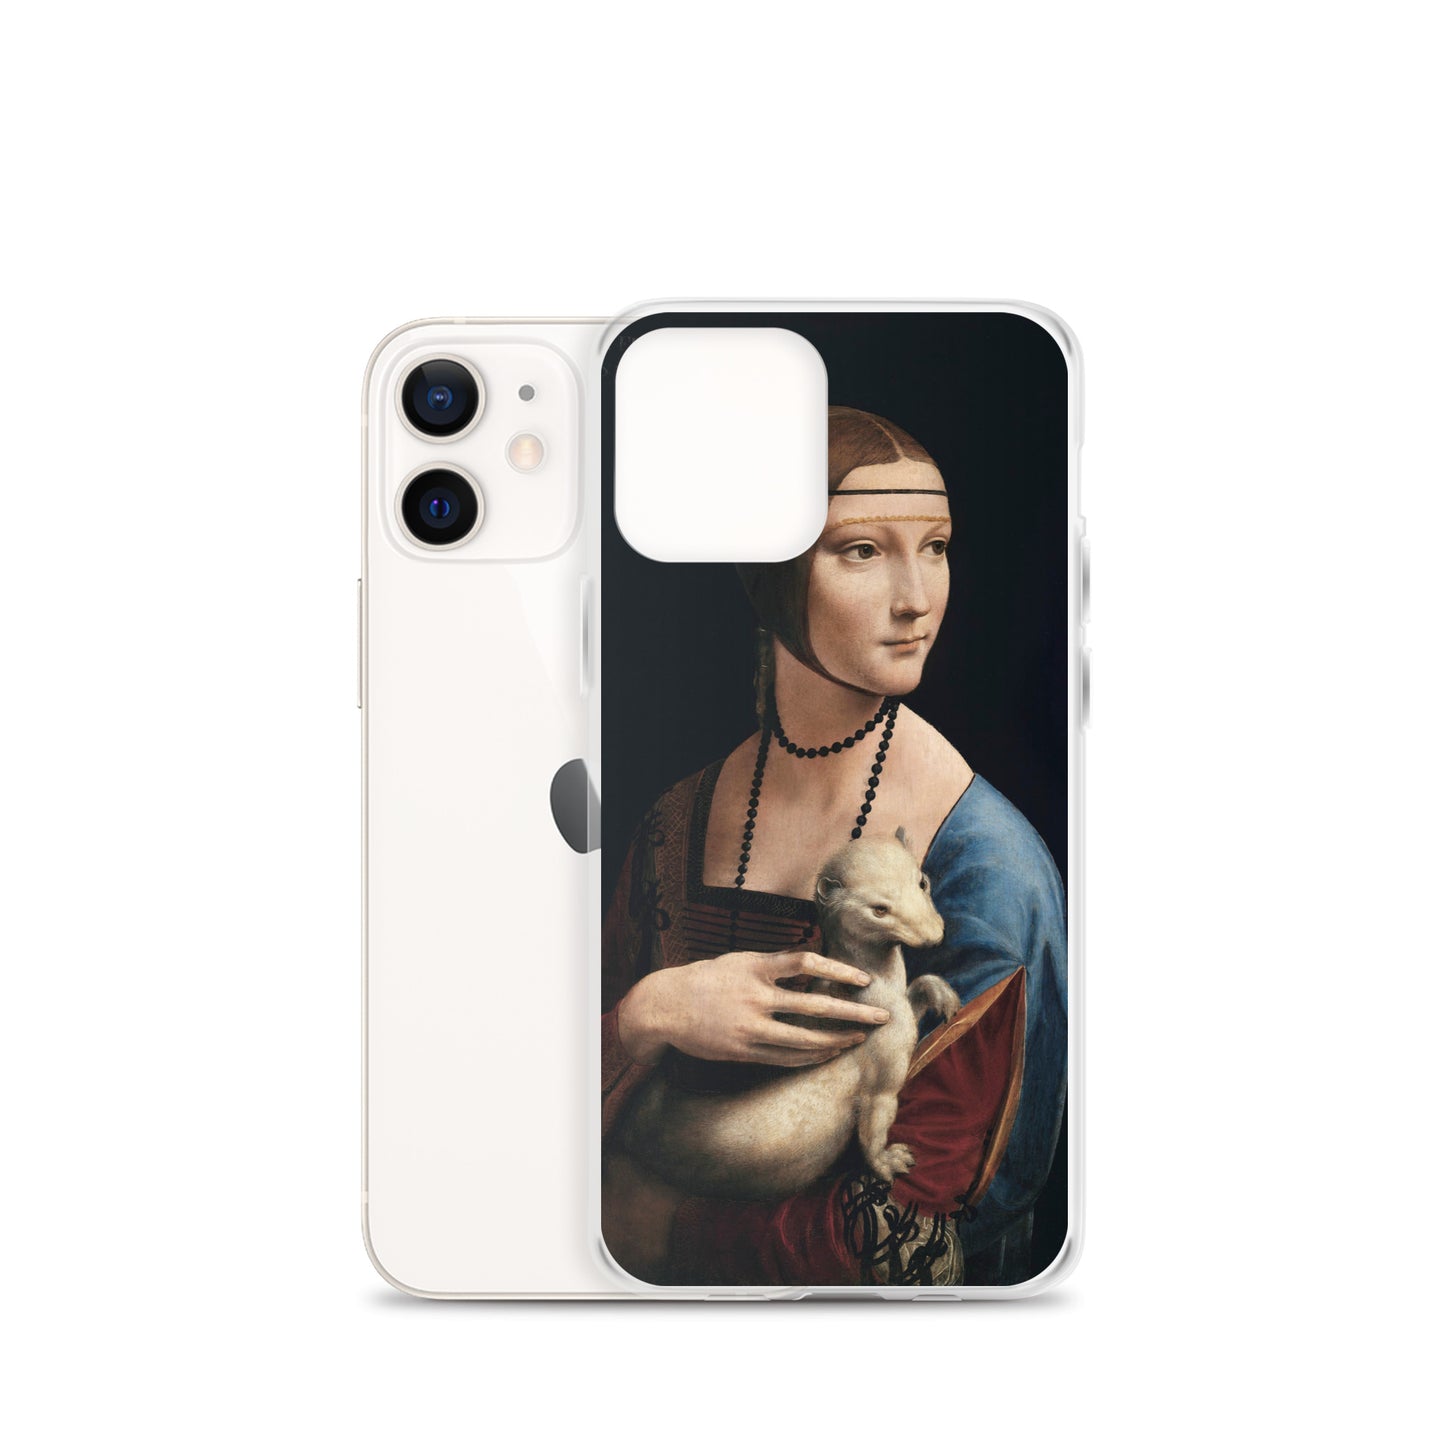 Lady with an Ermine iPhone Case